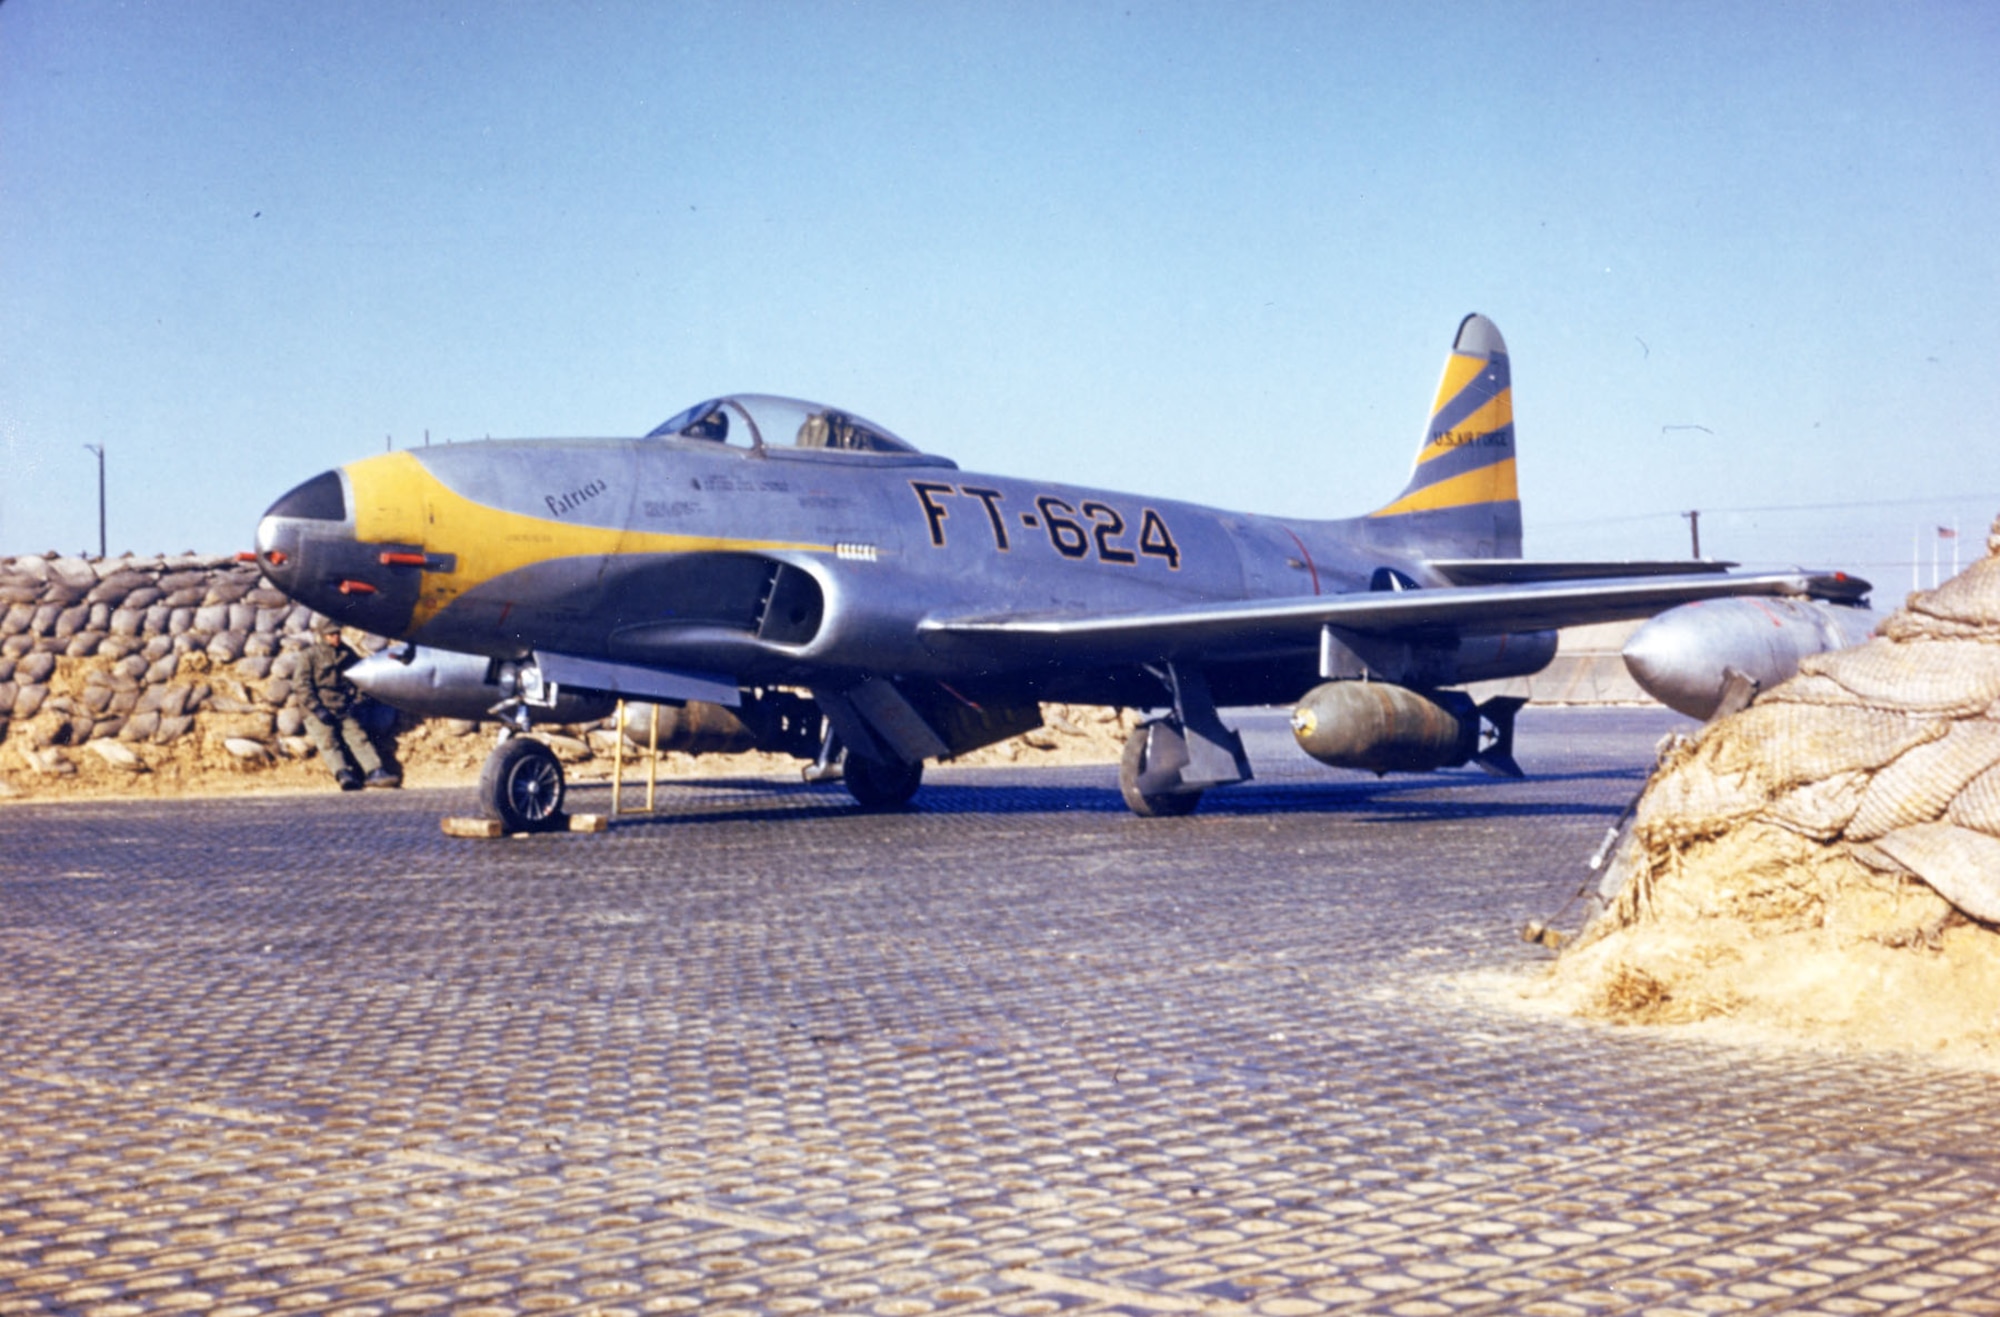 Mission-ready F-80C Shooting Star with two 1,000-lb. bombs and two large droppable fuel tanks. (U.S. Air Force photo)